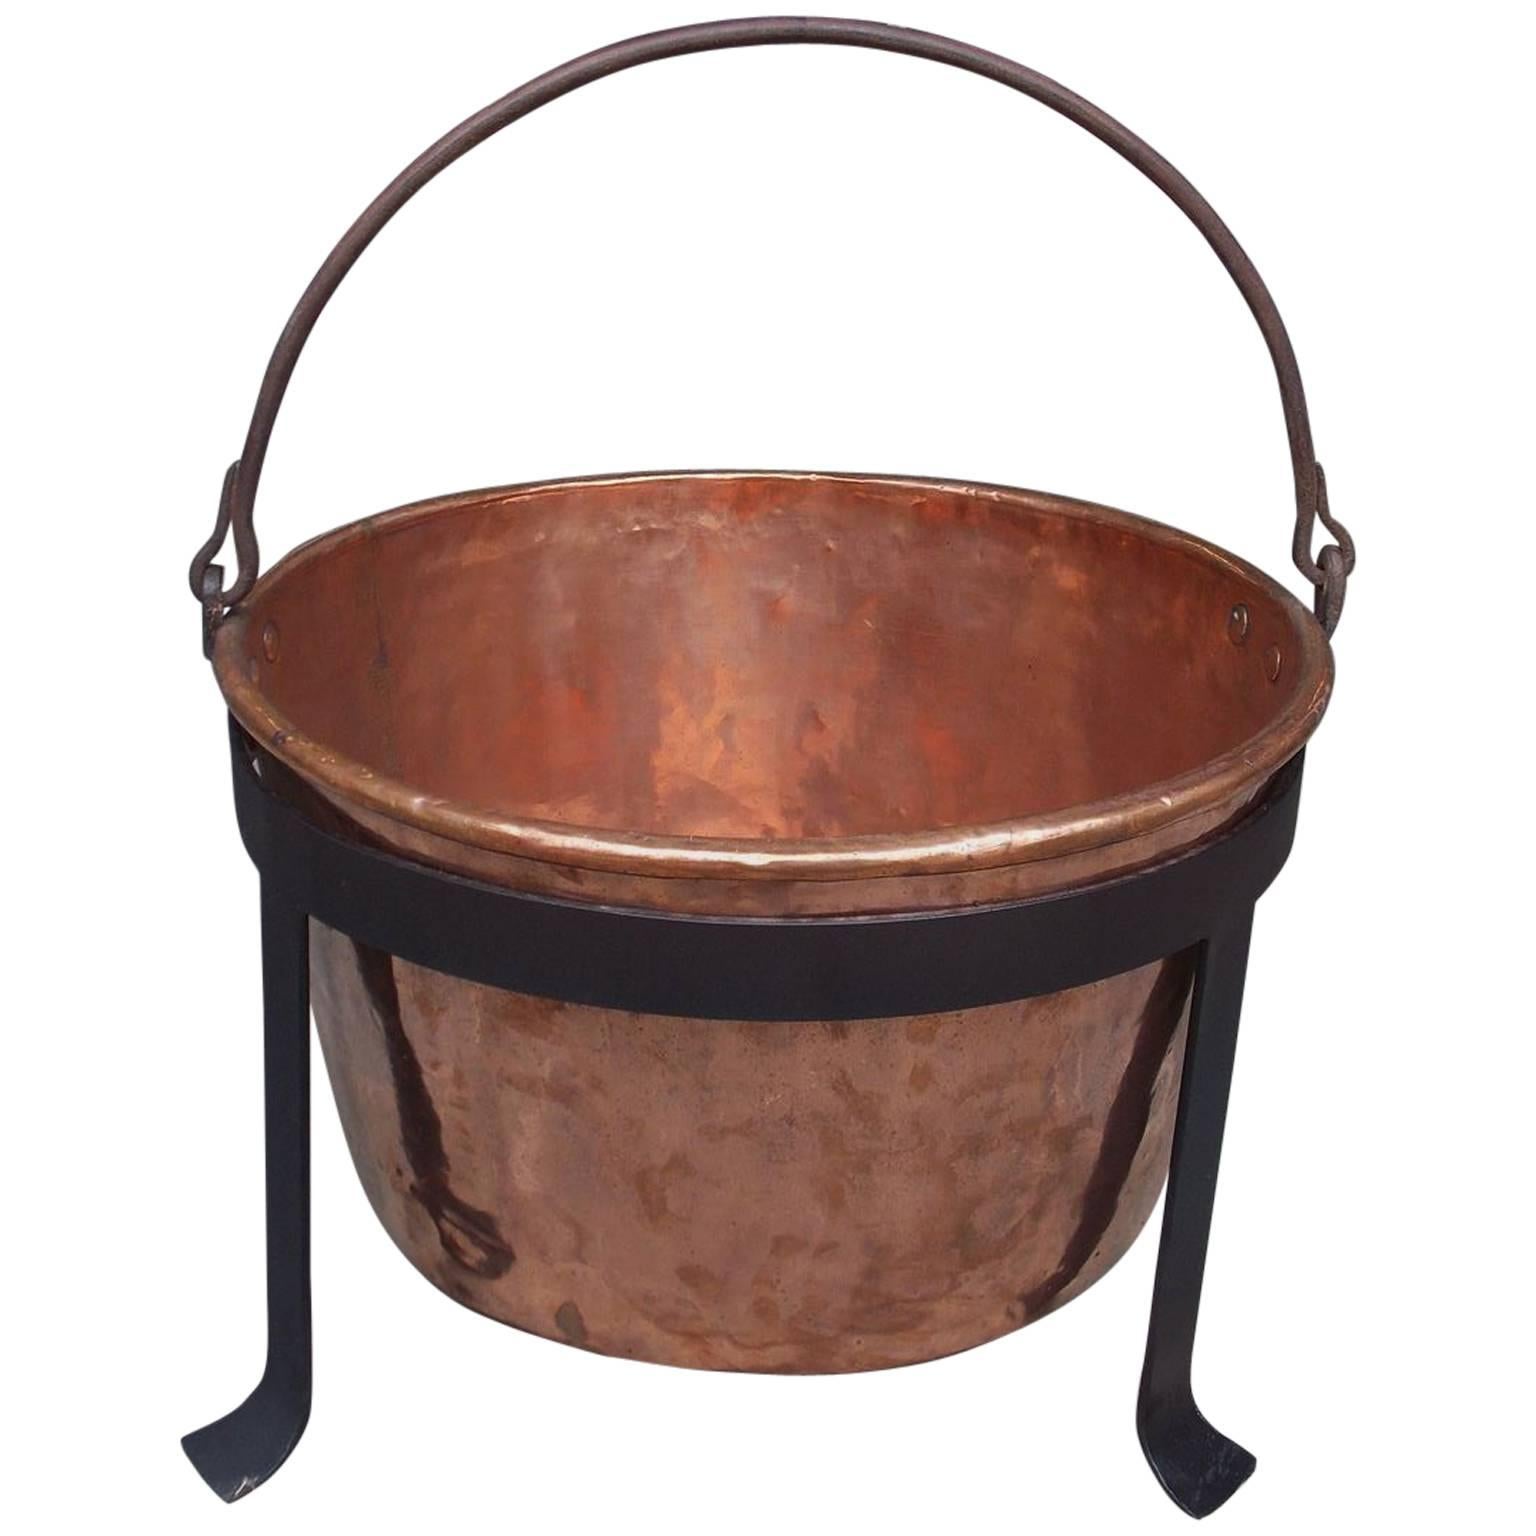 American Copper and Wrought Iron Plantation Cauldron on Stand, Circa 1780 For Sale